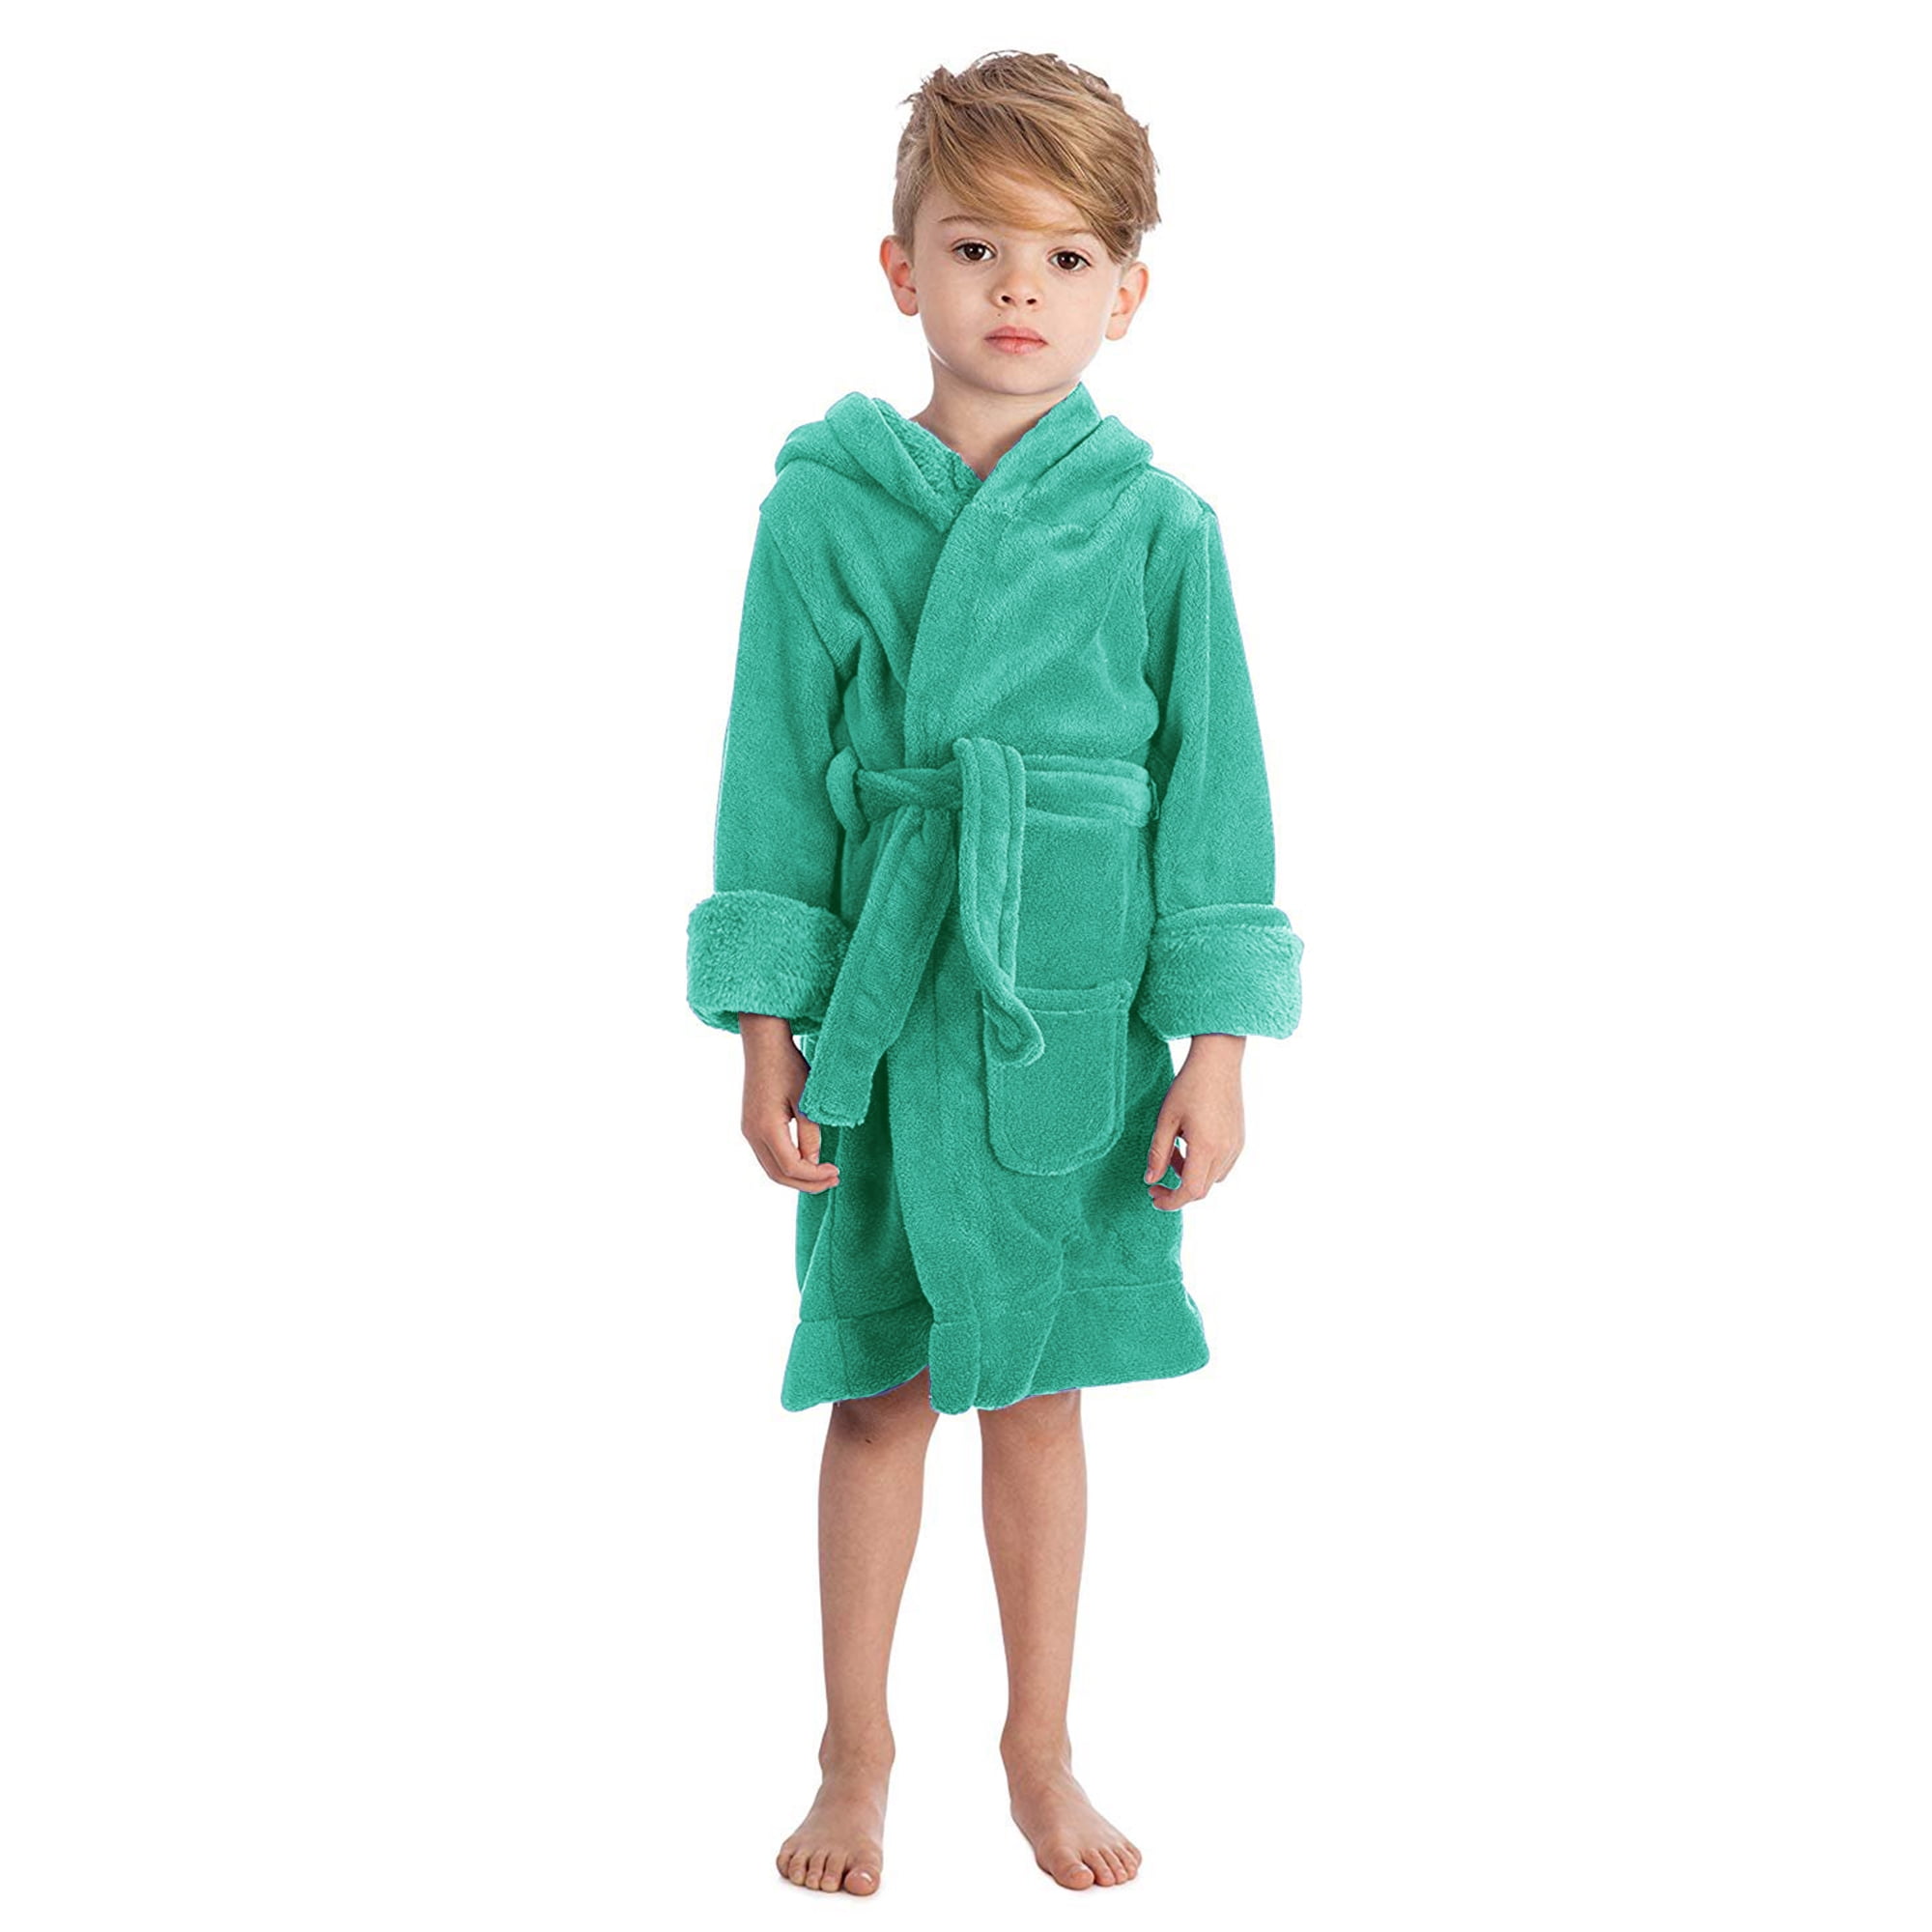 Elowel Pajamas Kids Robe with Hood for Boys and Girls Fleece Robes Green Size 2T